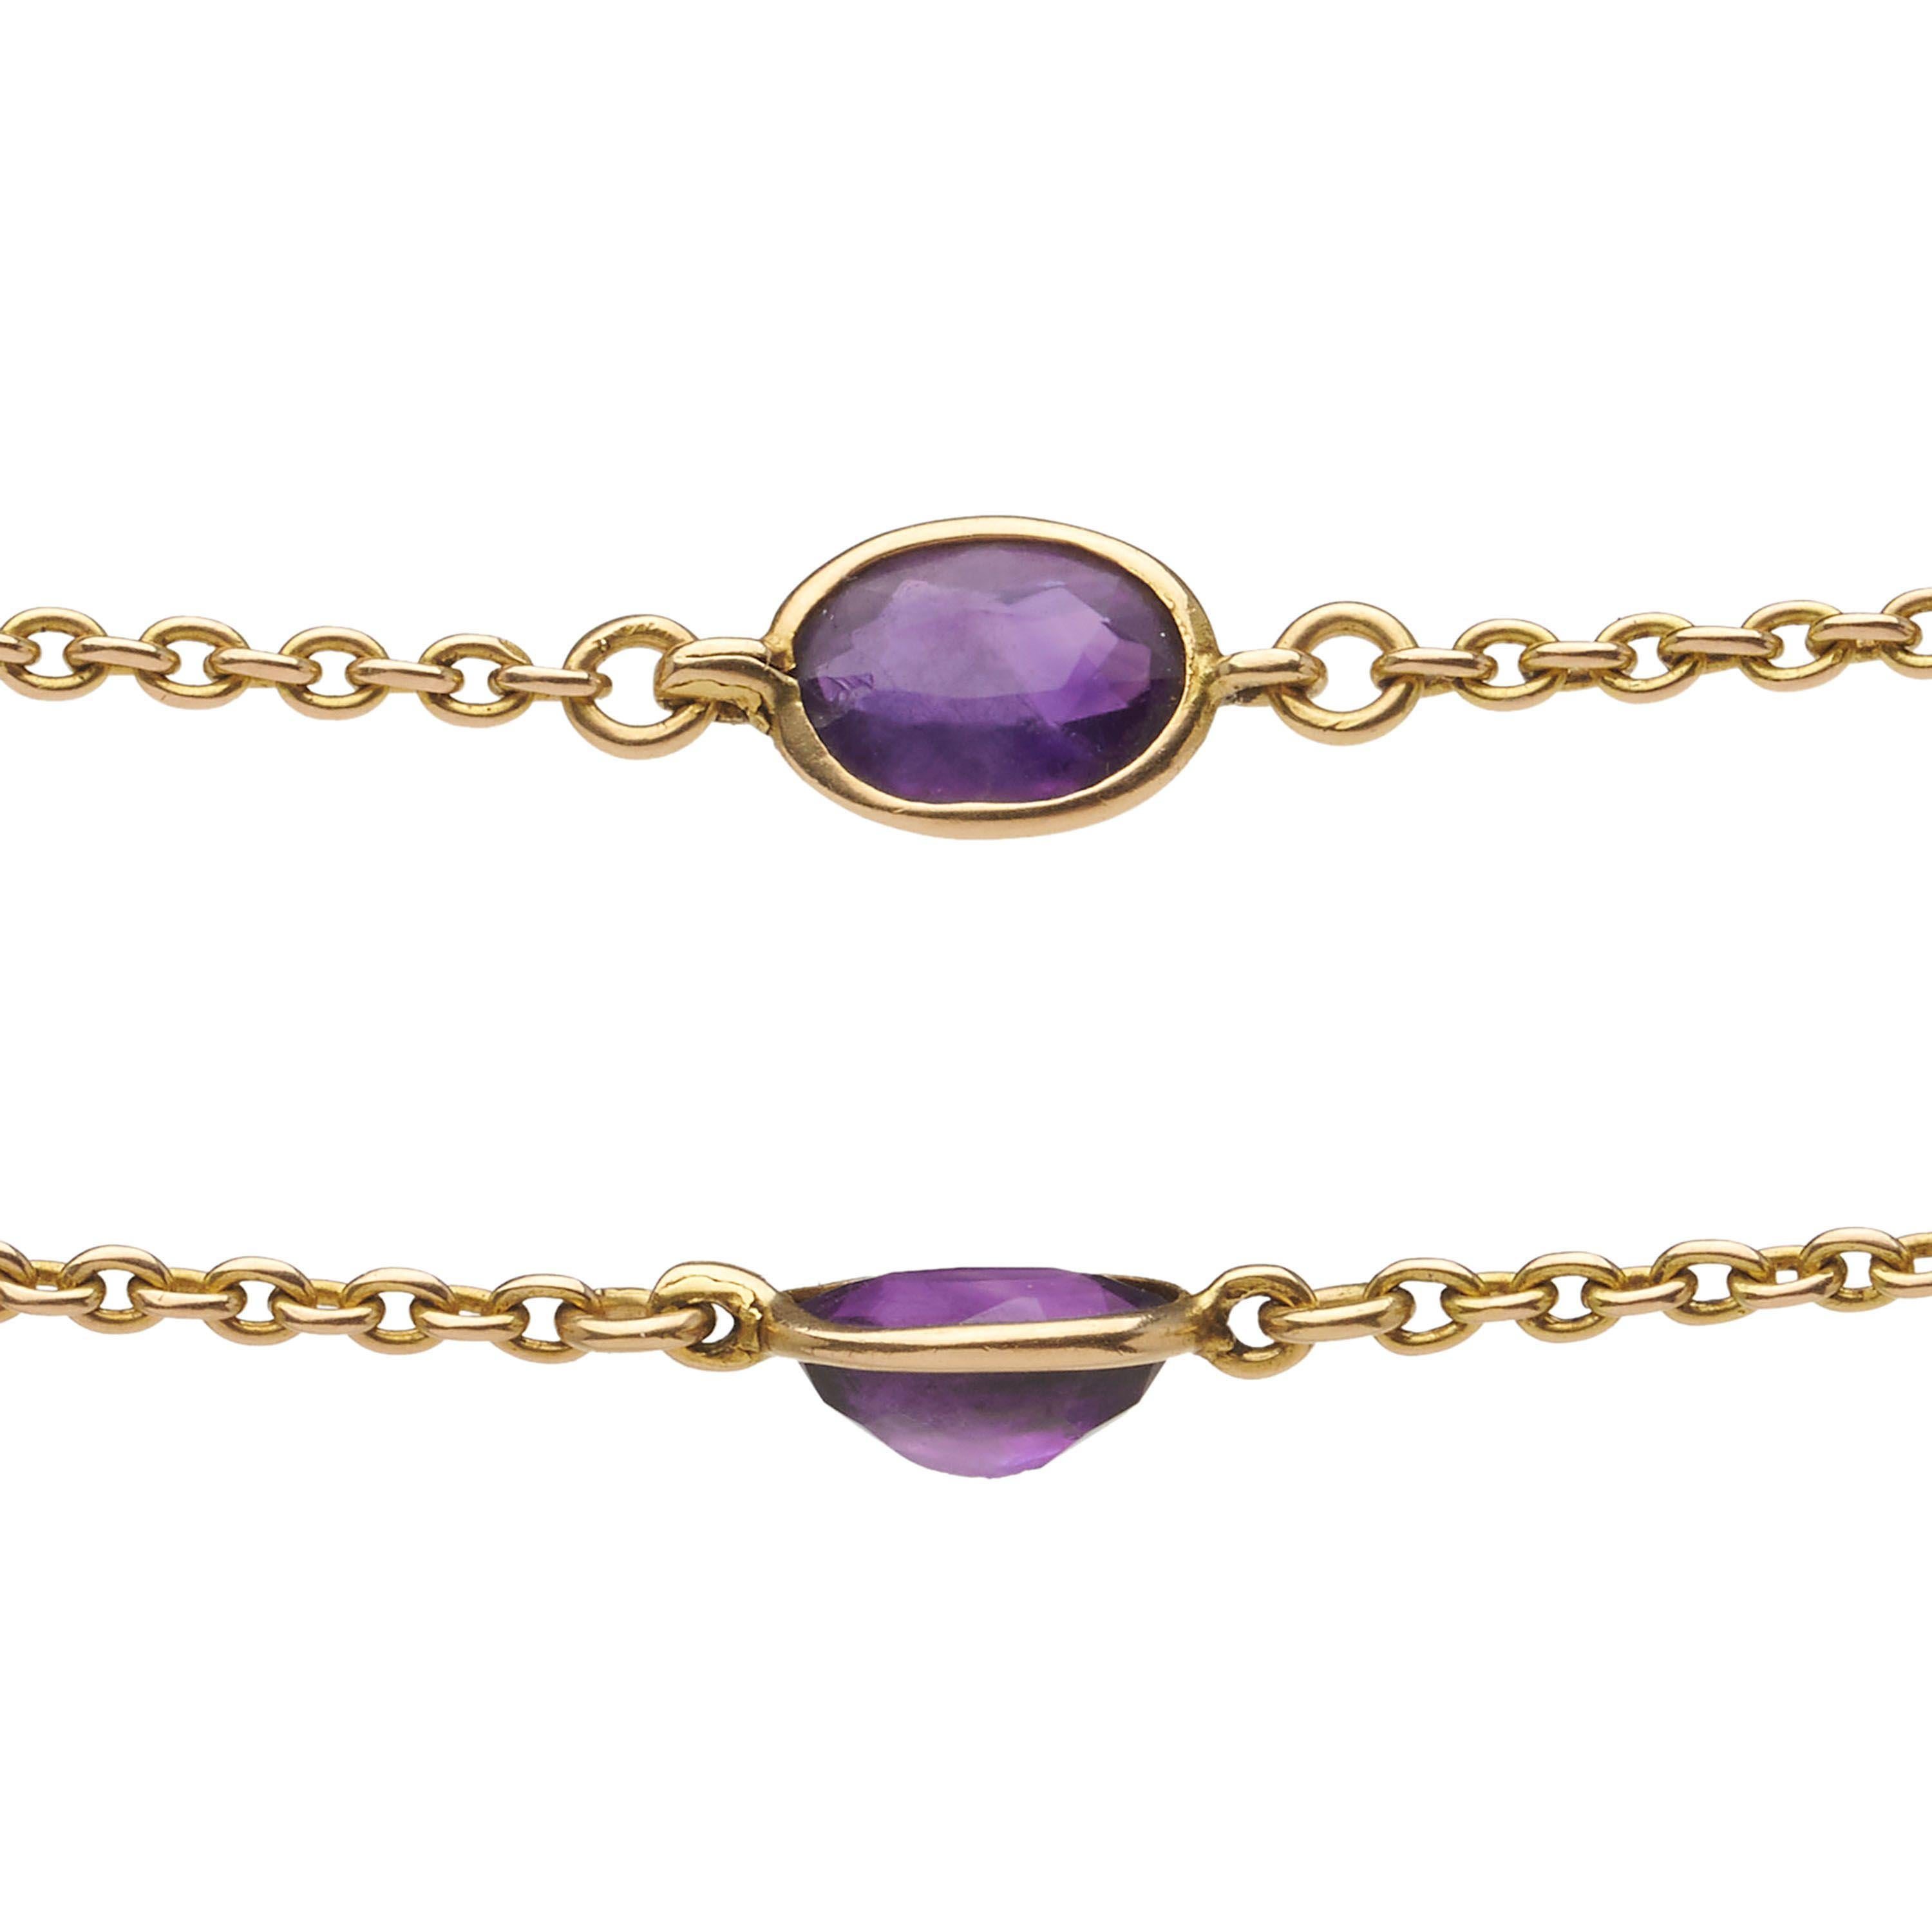 Oval Cut Antique Amethyst and Gold Long Chain Necklace, Circa 1920 For Sale